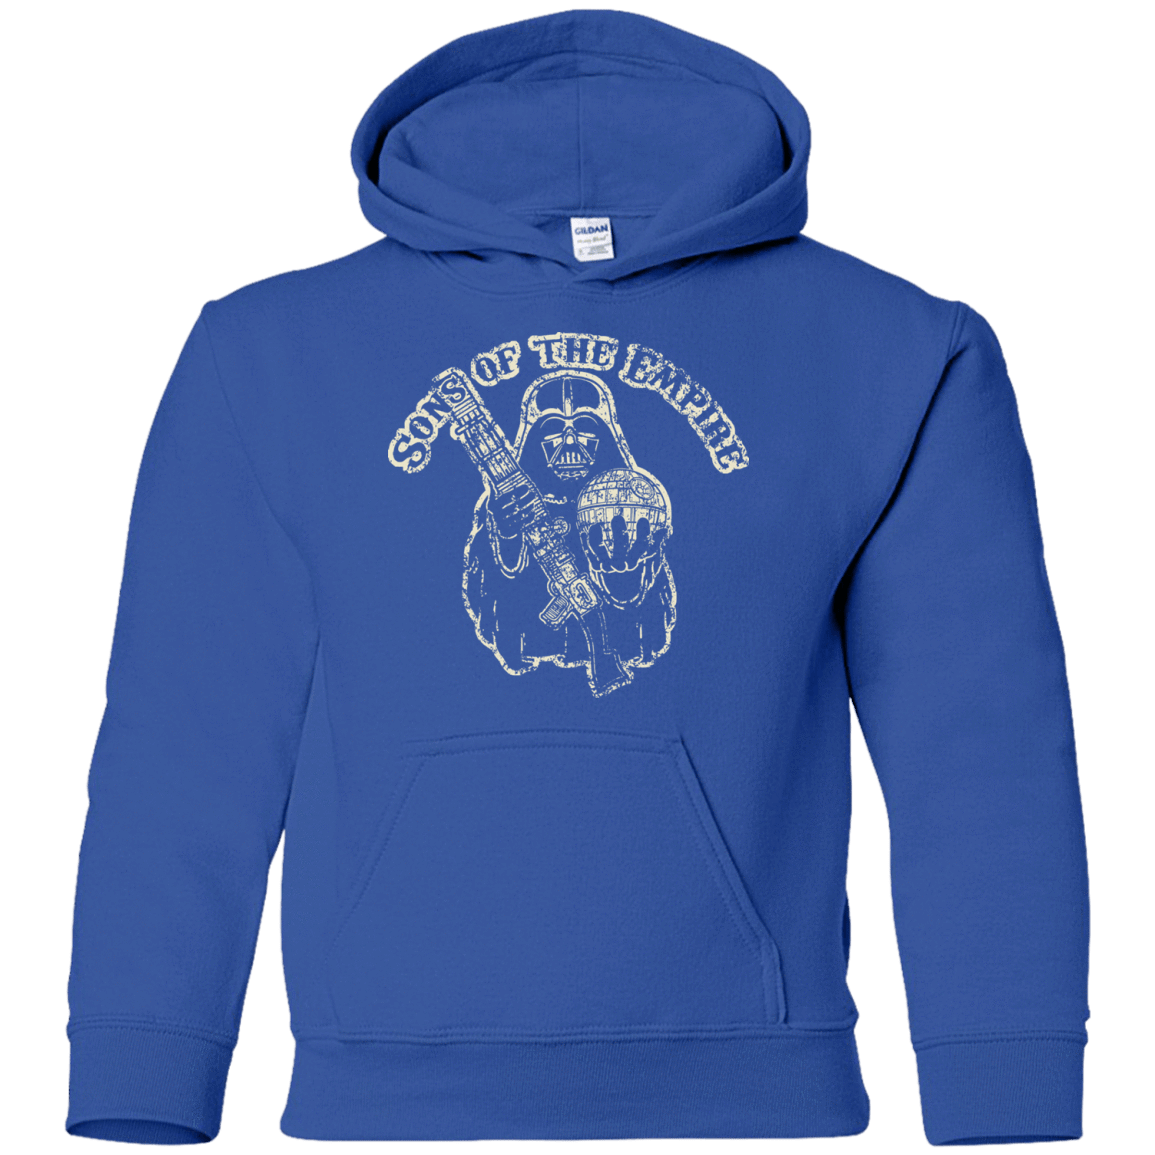 Sweatshirts Royal / YS Sons of the empire Youth Hoodie